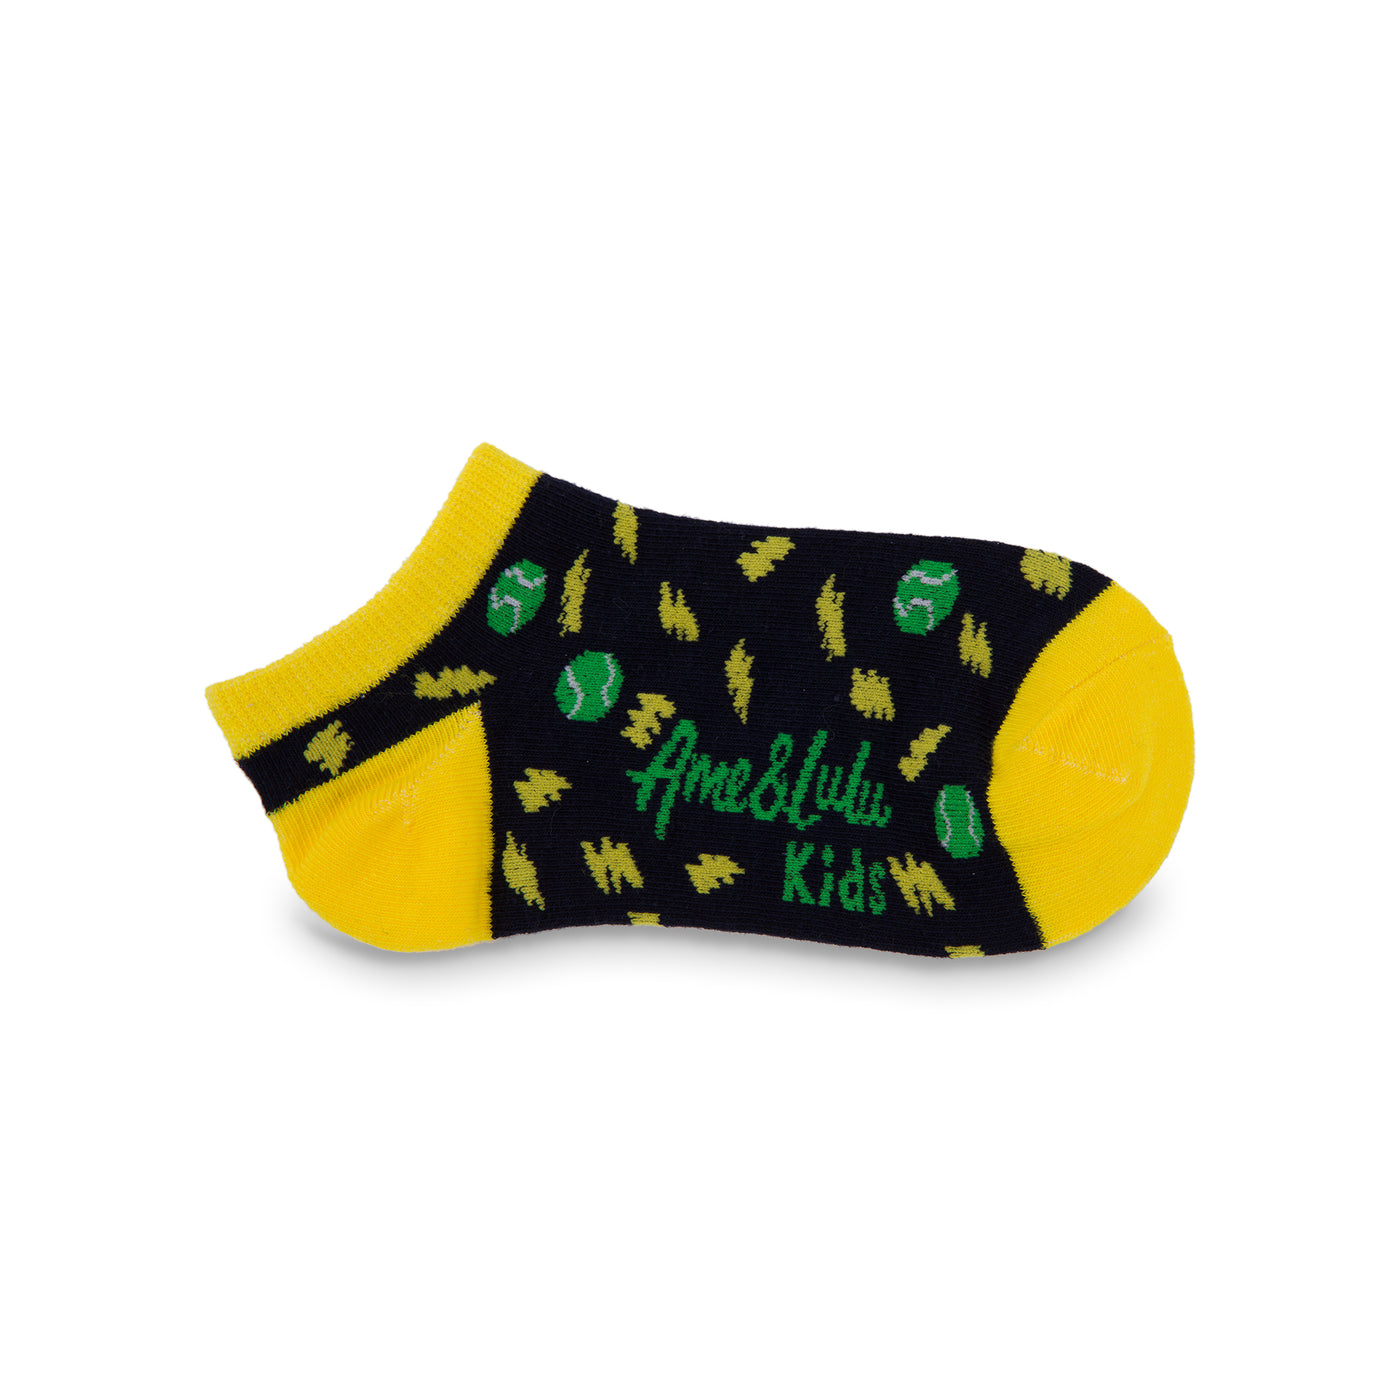 pair of navy kids socks with yellow heel and toes with lightning bolt and tennis ball pattern stitched on sock